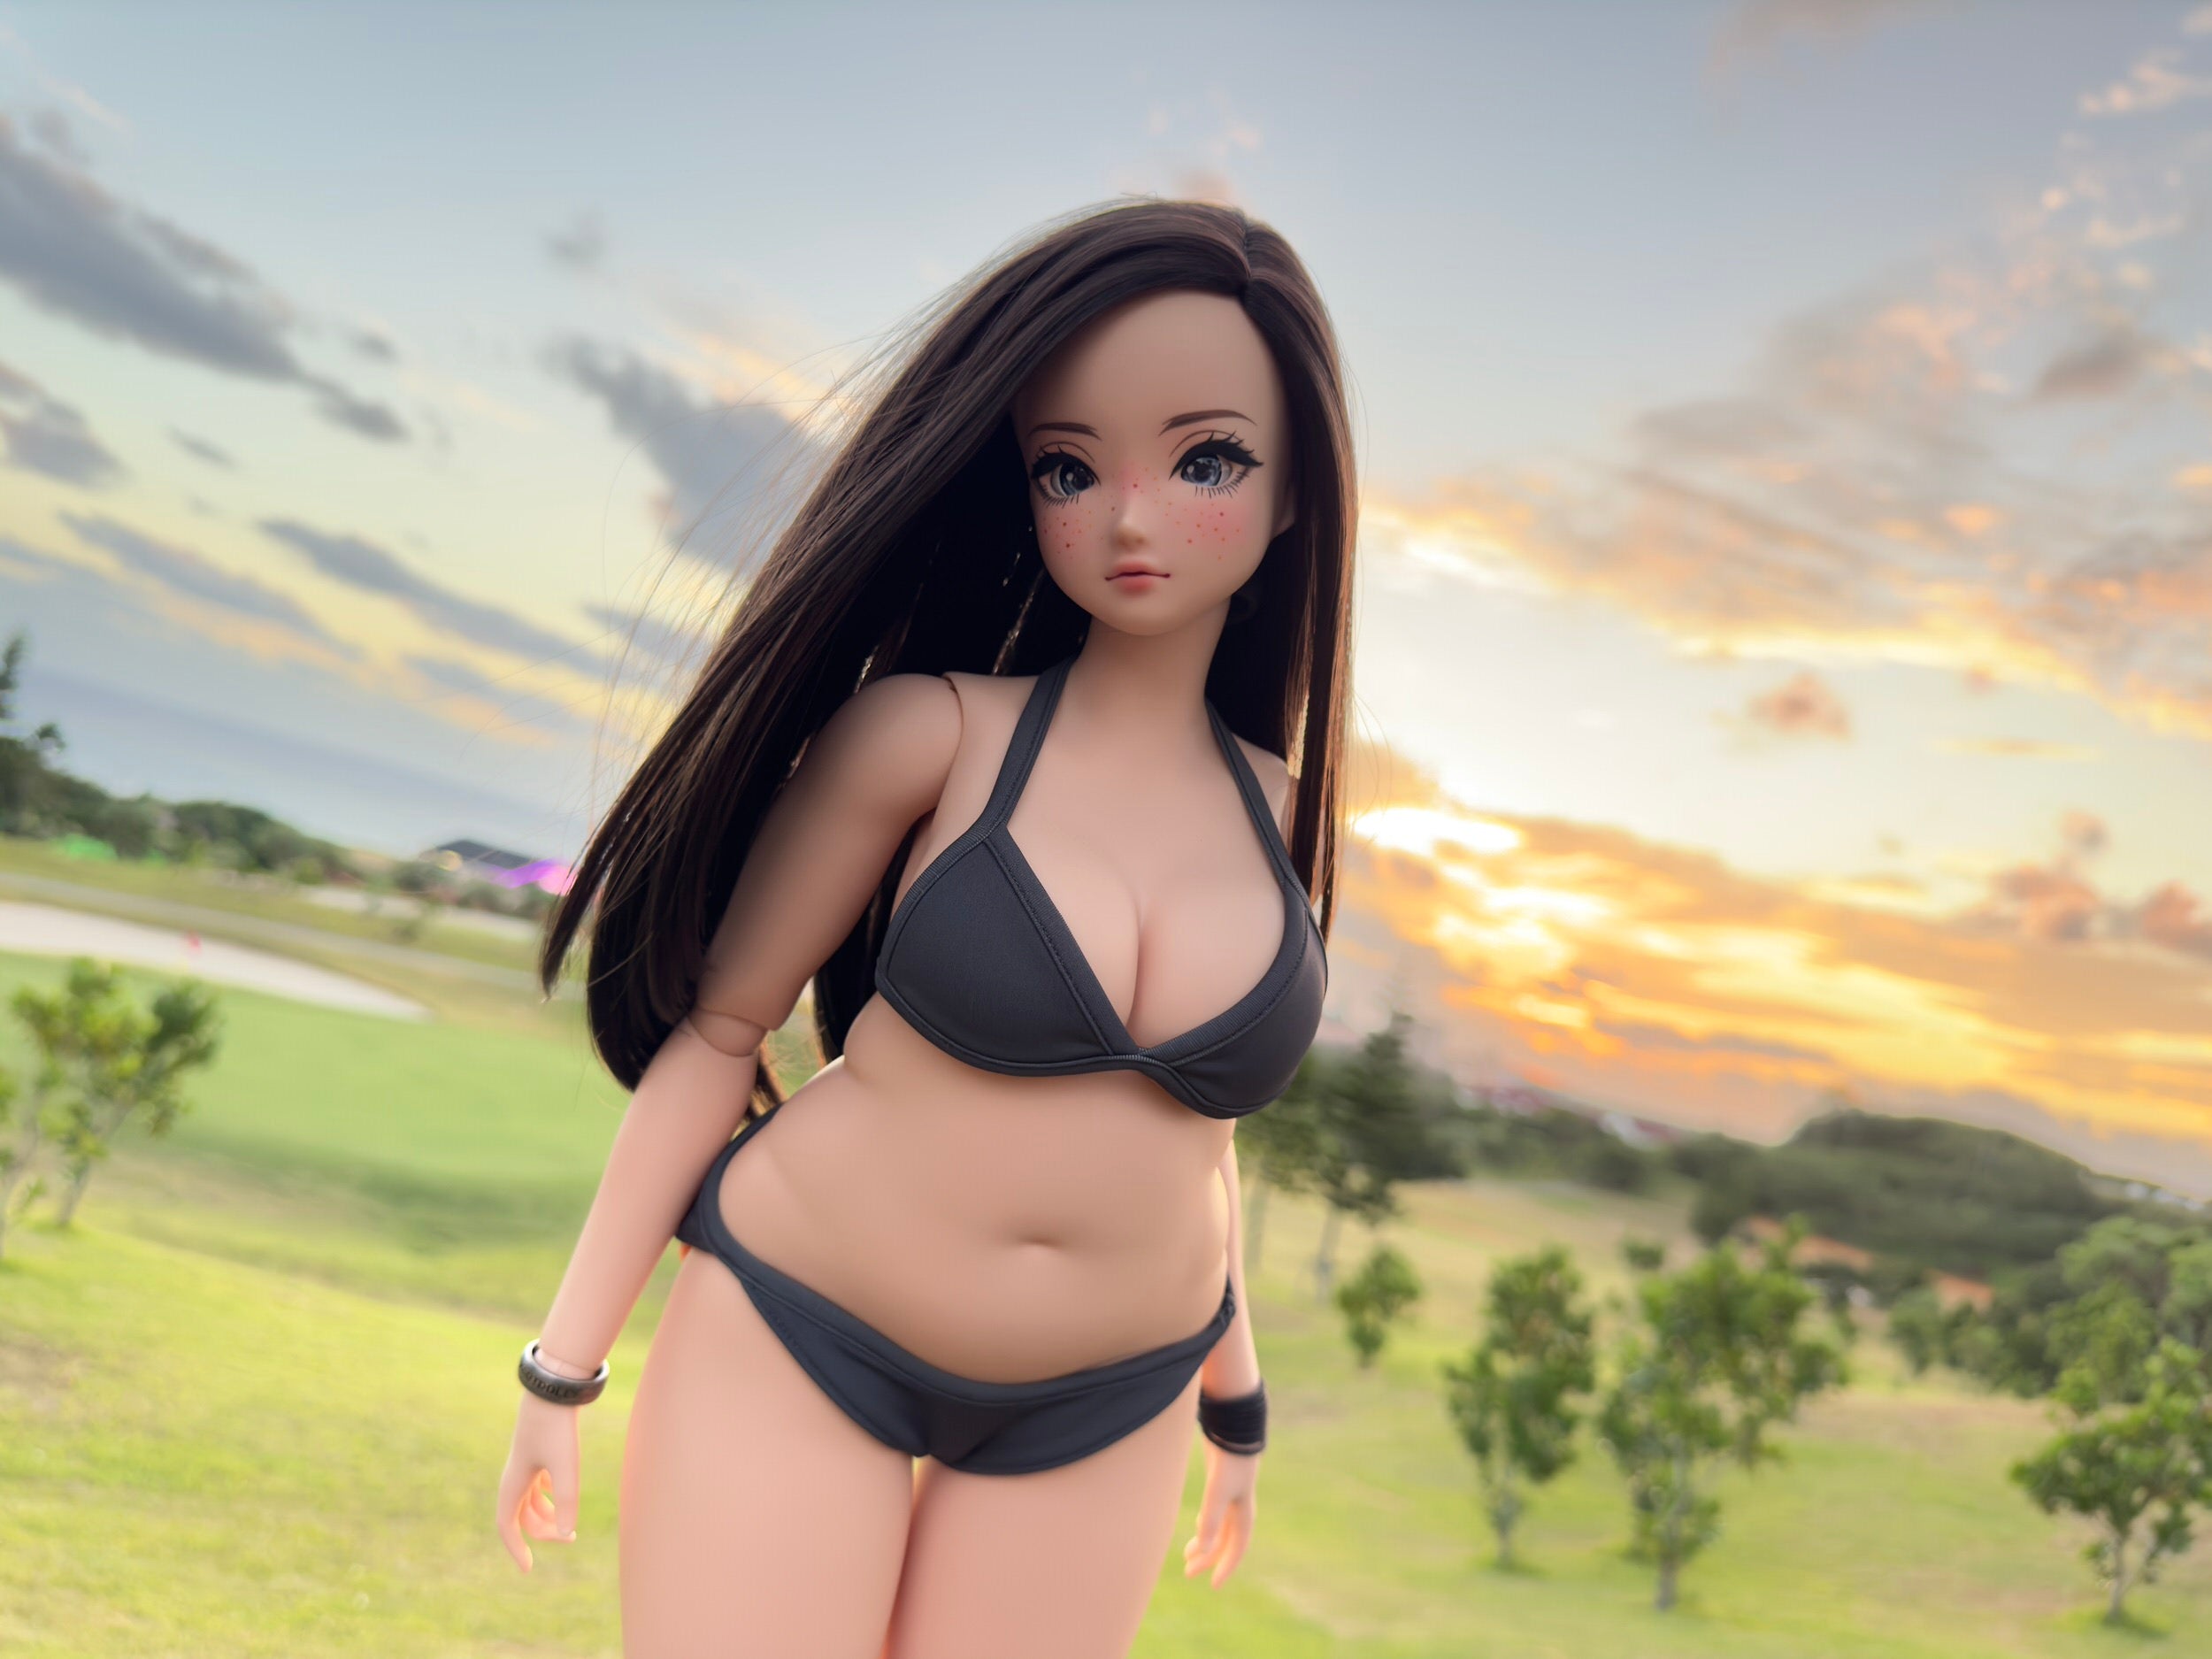 Smart Doll - Live and Let Live (Cinnamon) – Smart Doll Store